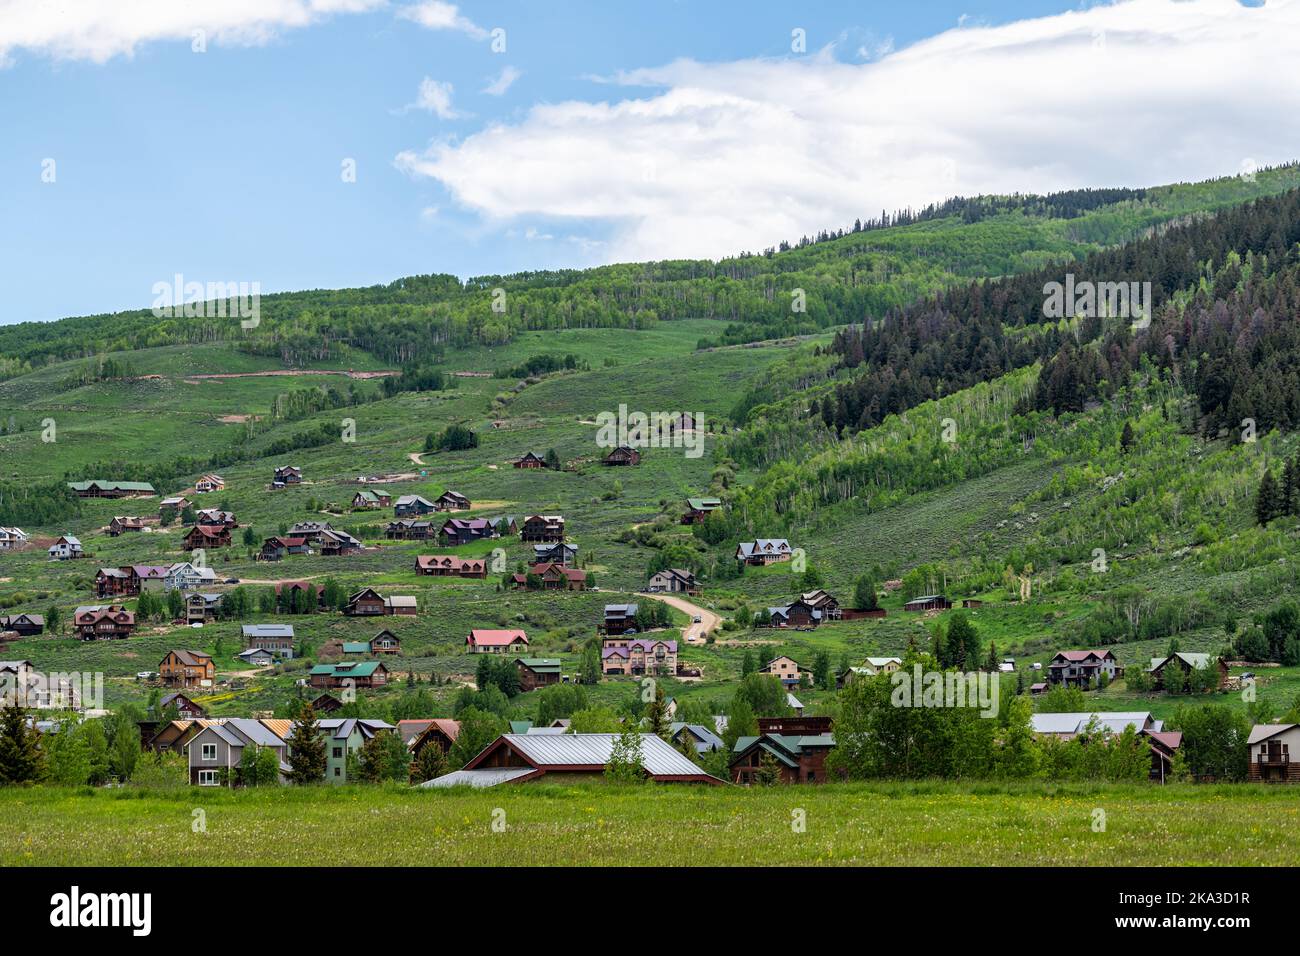 Mount Crested Butte village town houses in summer with many wooden lodging buildings on hillside with green lush color grass Stock Photo